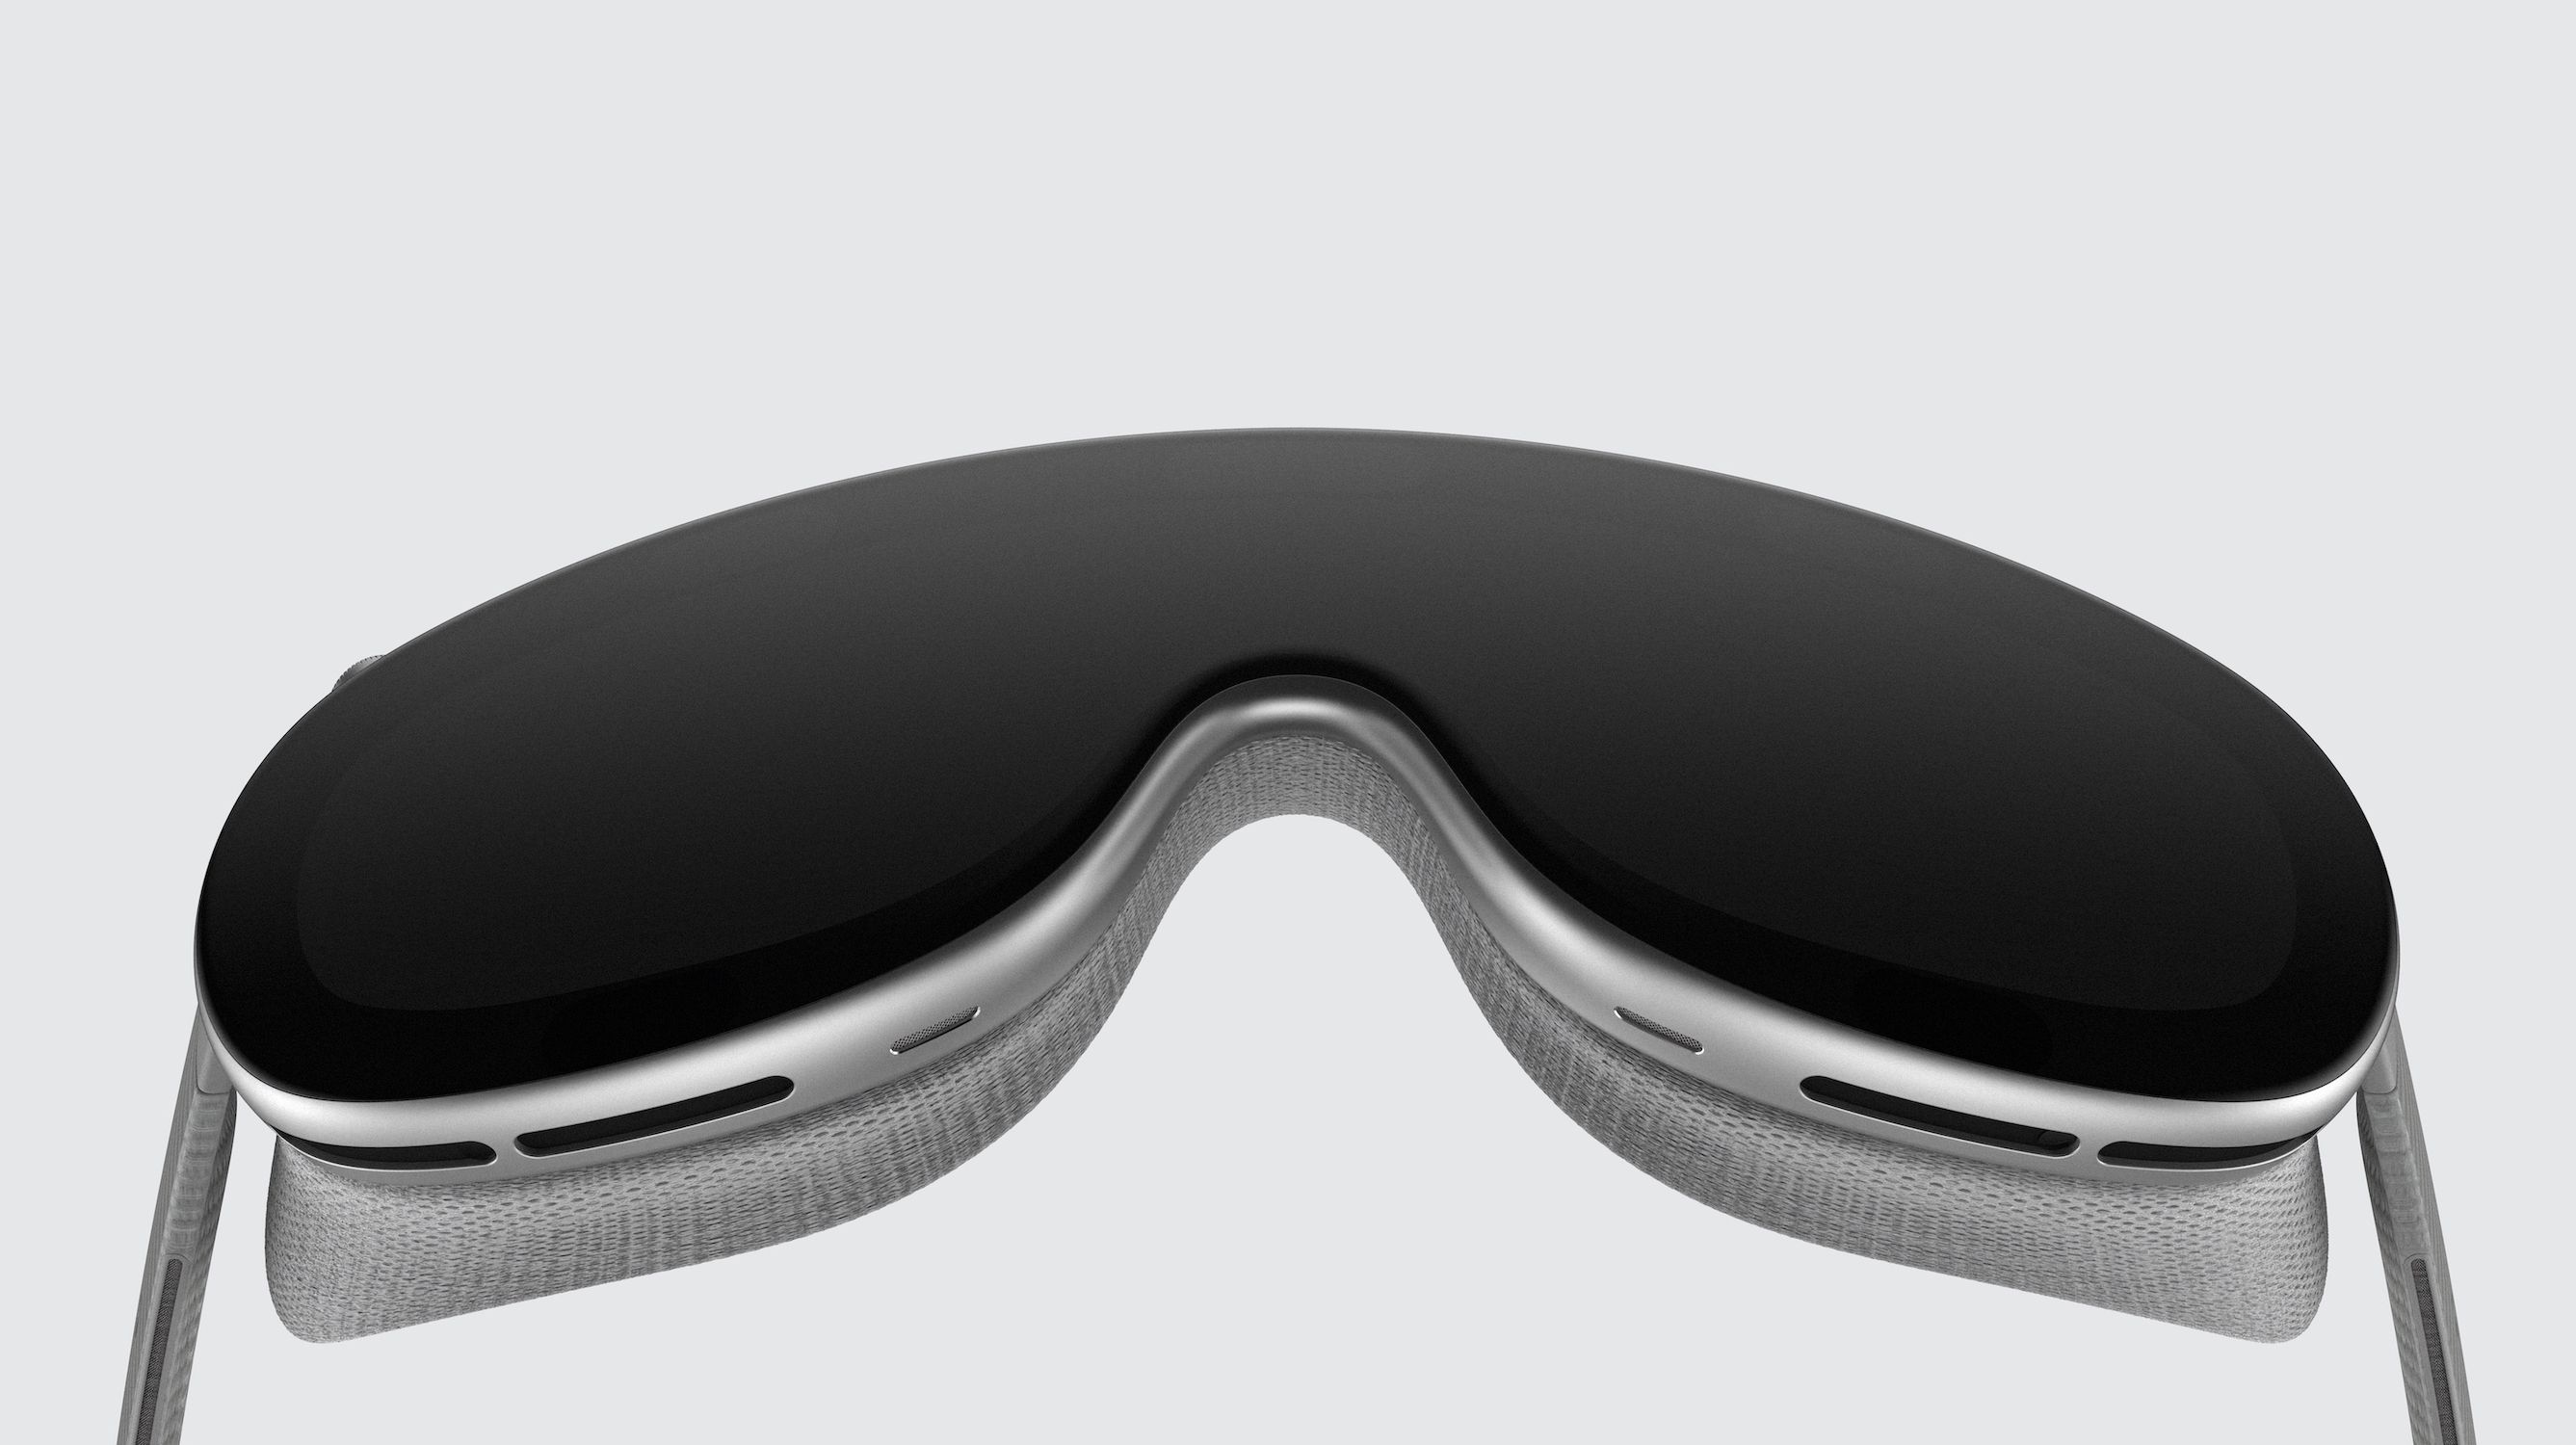 Just a few weeks ahead of WWDC, it appears that Apple continues to secretly apply for trademarks related to its rumored AR/VR headset. Apple headset c